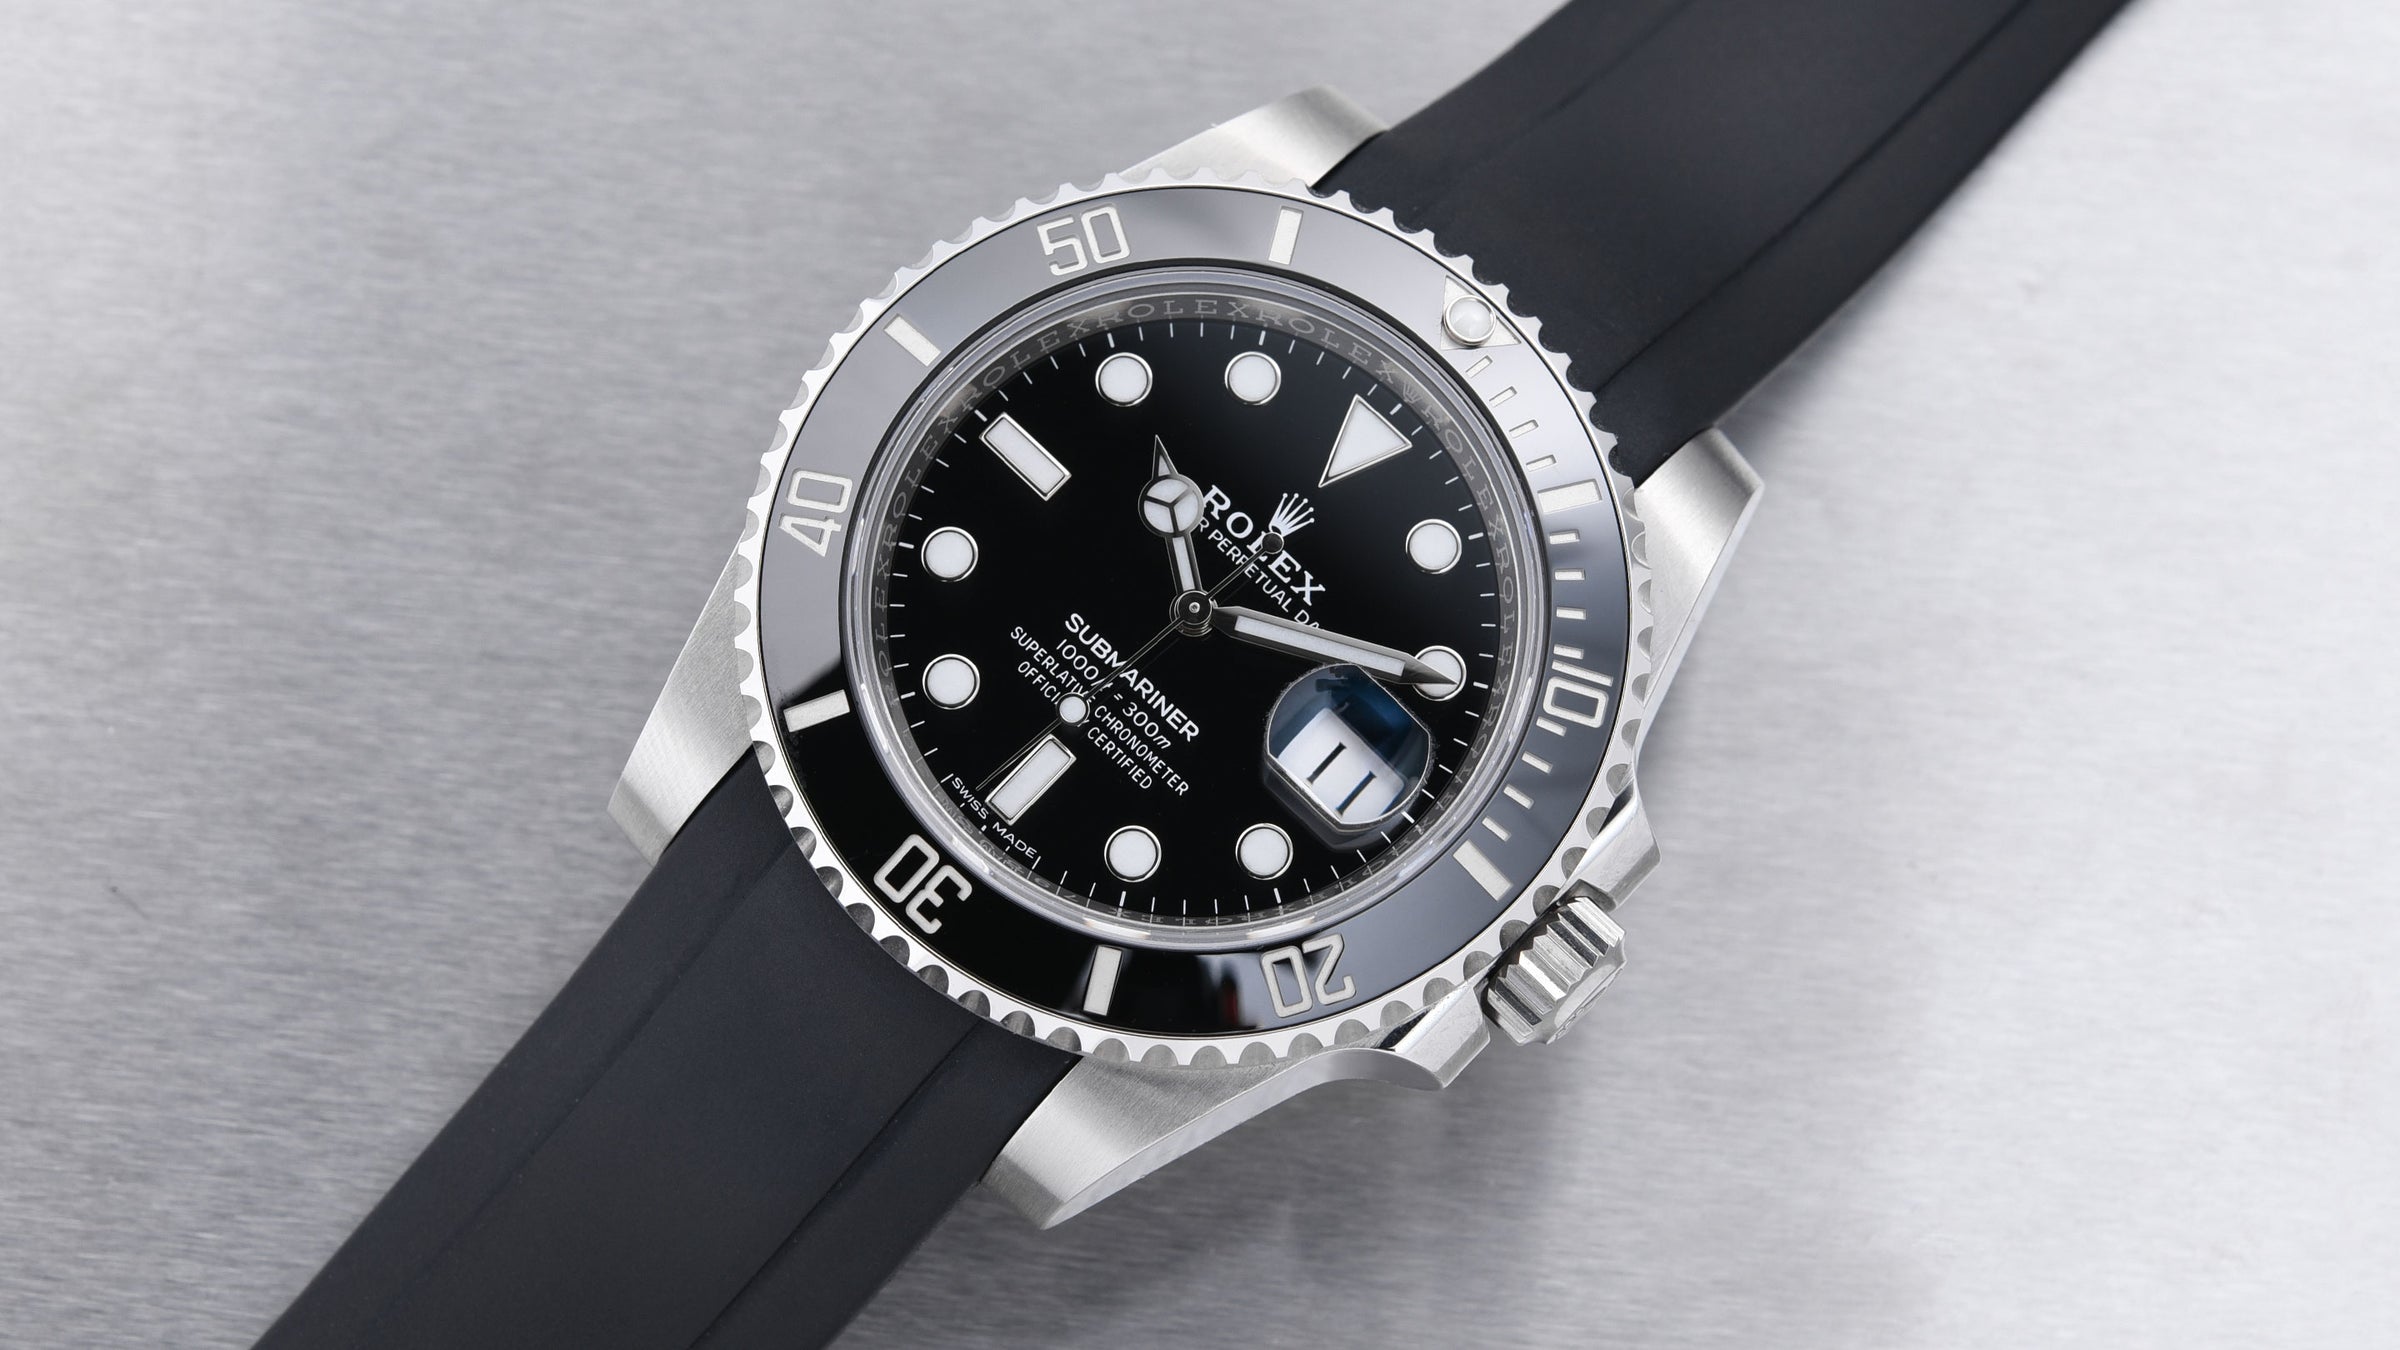 Rubber Strap on Rolex Submariner - Everest Curved End Rubber Strap